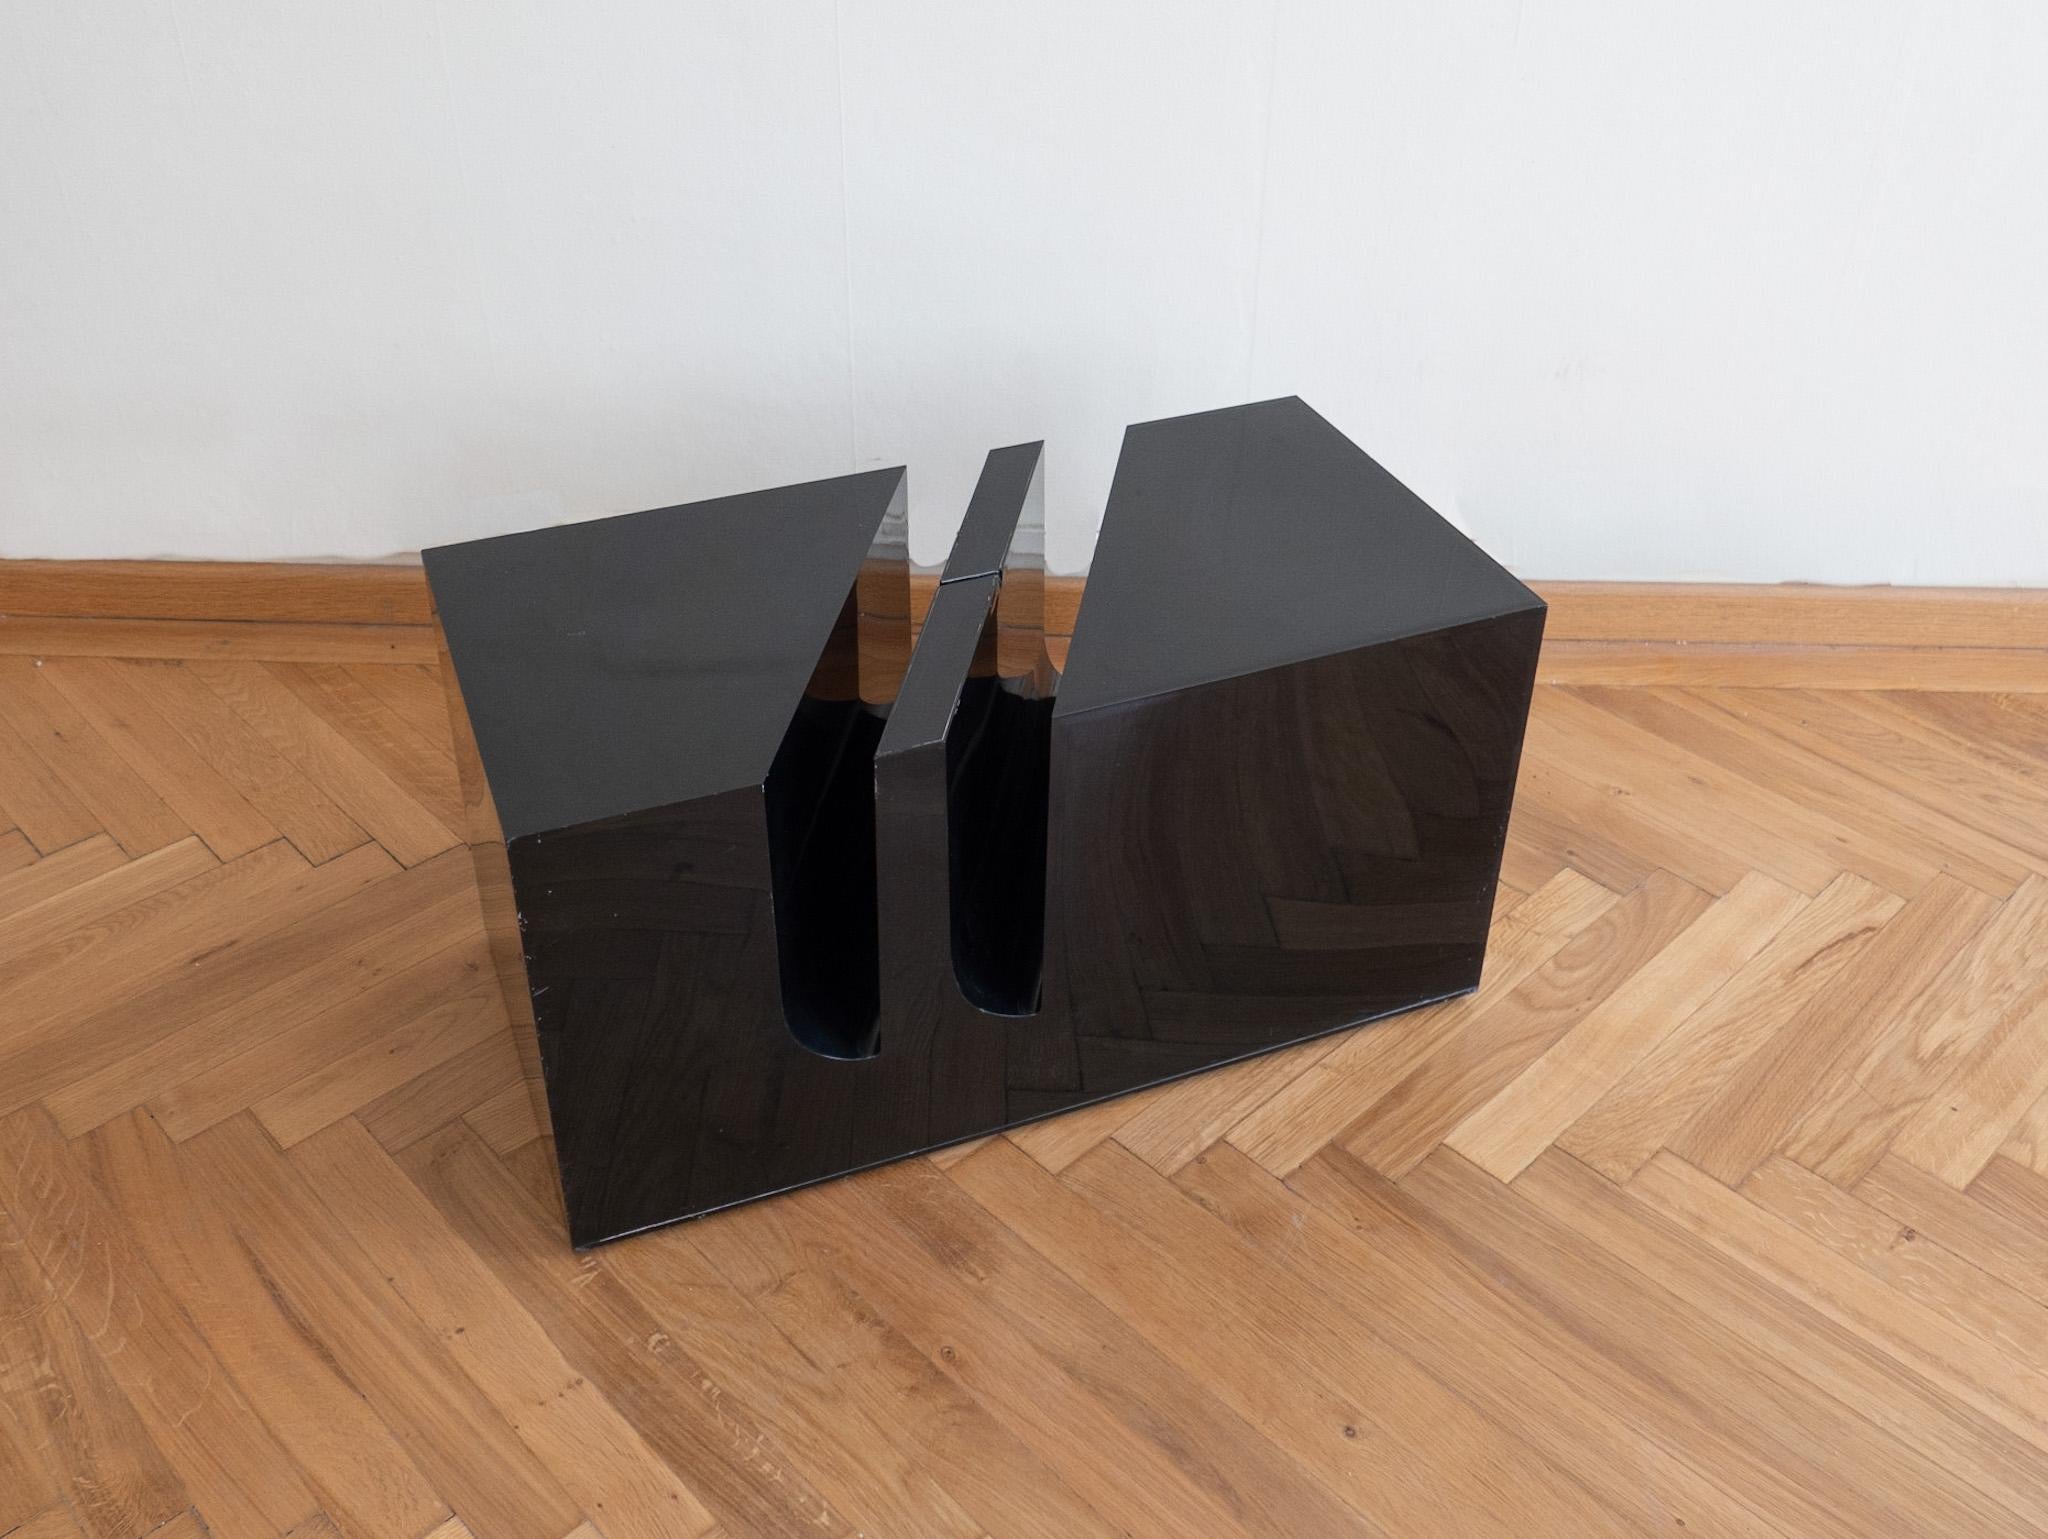 Mid-Century Modern Magazine/Records Holder Side Table by Marco Zanuso, Italy 1970s.

Step into the future with this remarkable Italian space age side table and magazine holder crafted by the renowned Italian designer Marco Zanuso in the 1970s.